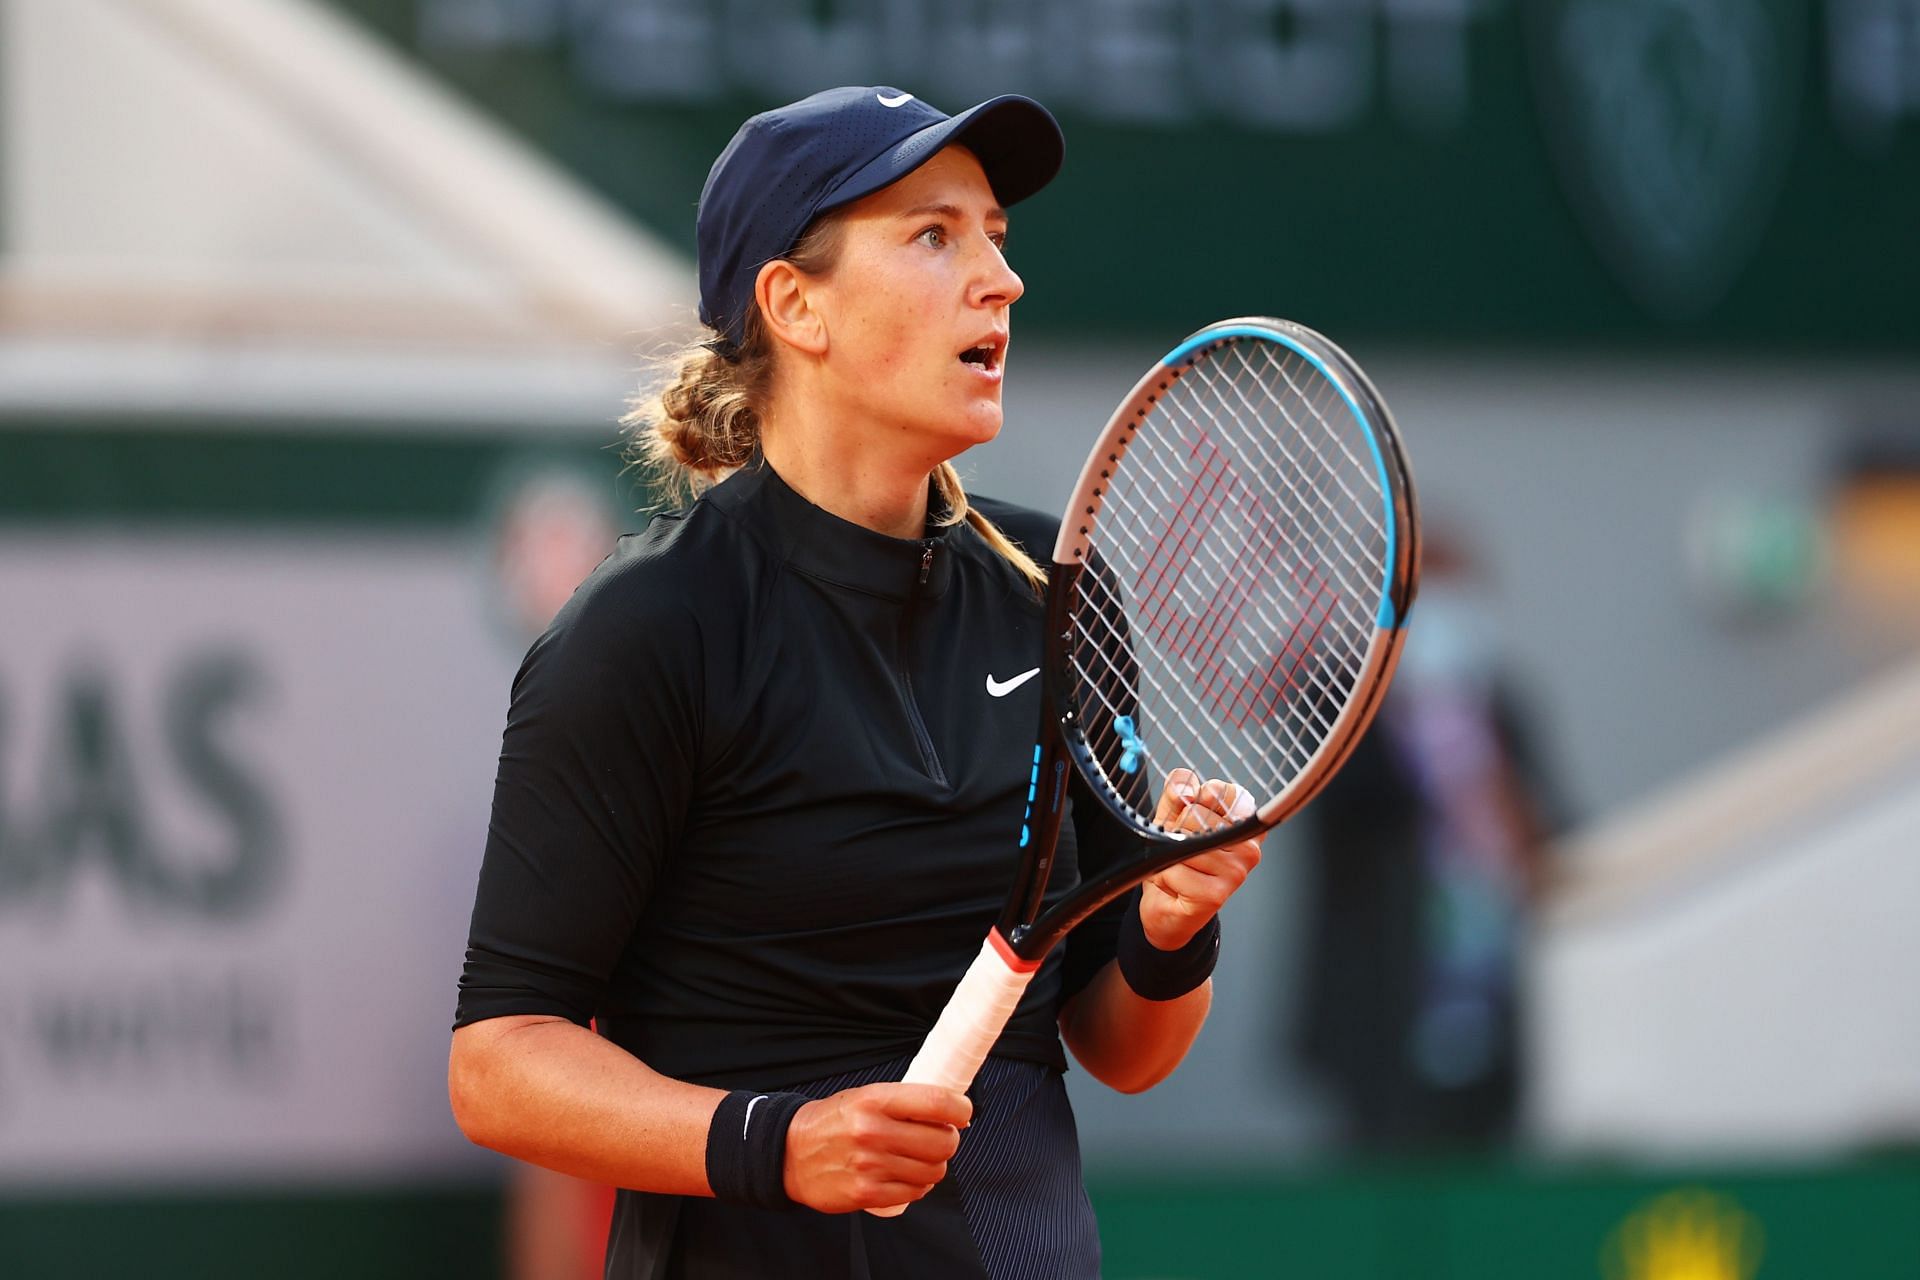 Victoria Azarenka and Bianca Andreecu will also lock horns in the opening round.